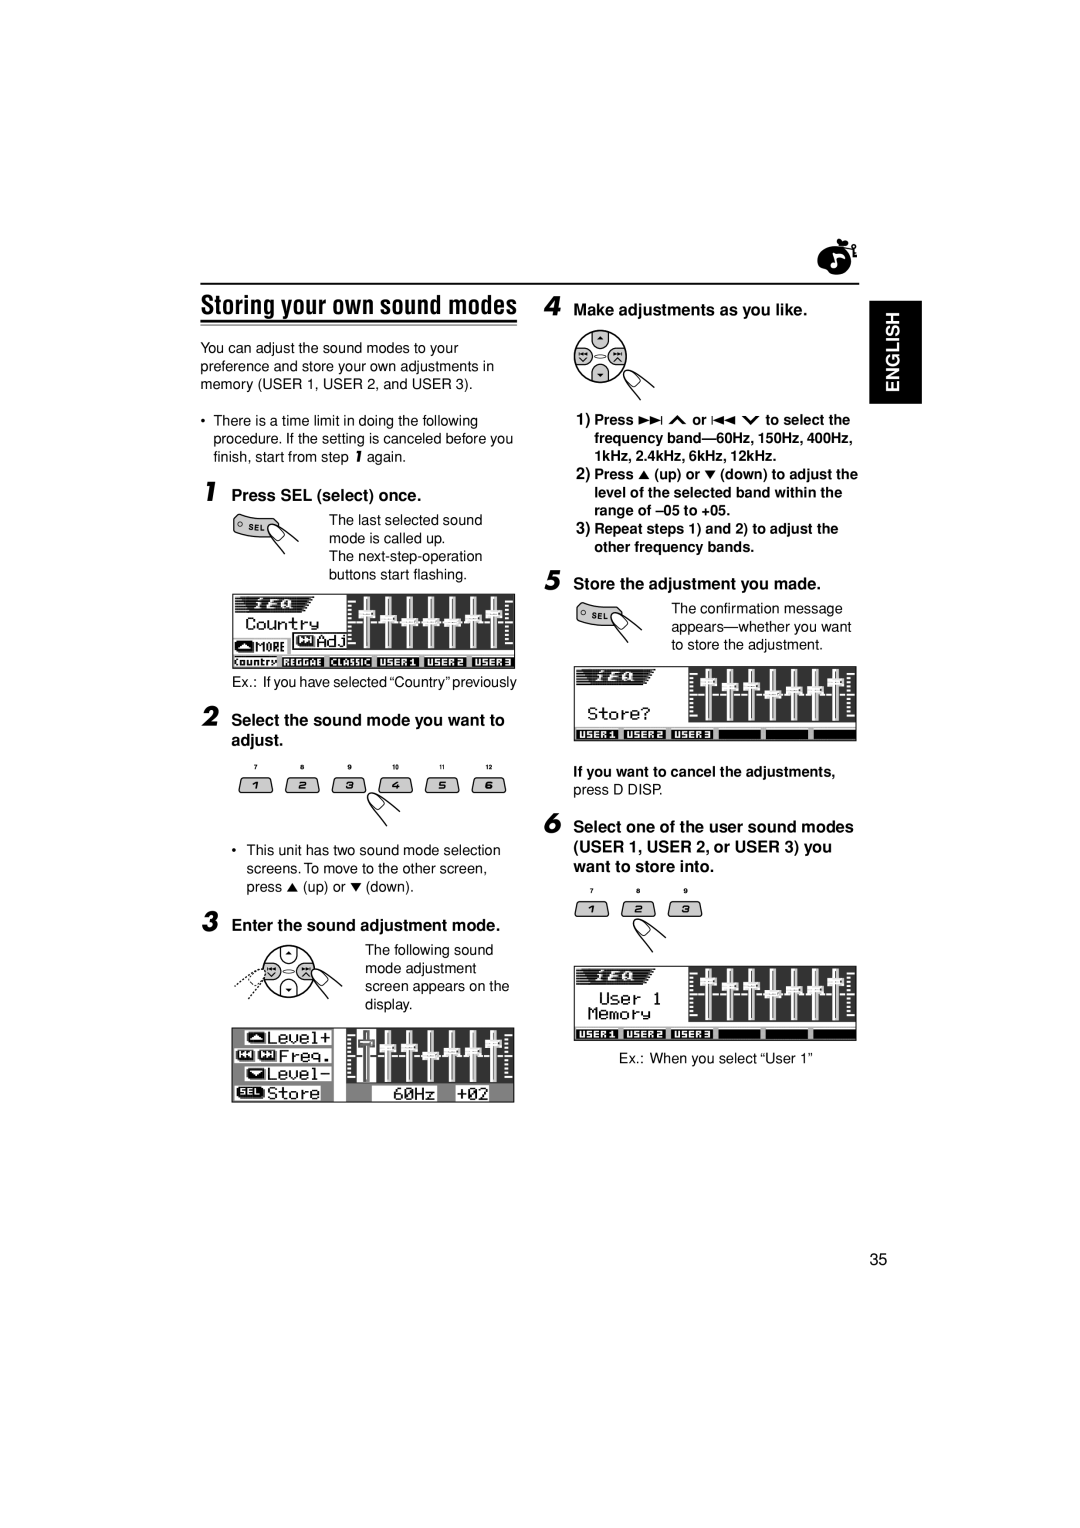 JVC KD-LH401 service manual Storing your own sound modes 4 Make adjustments as you like, Press SEL select once, English 